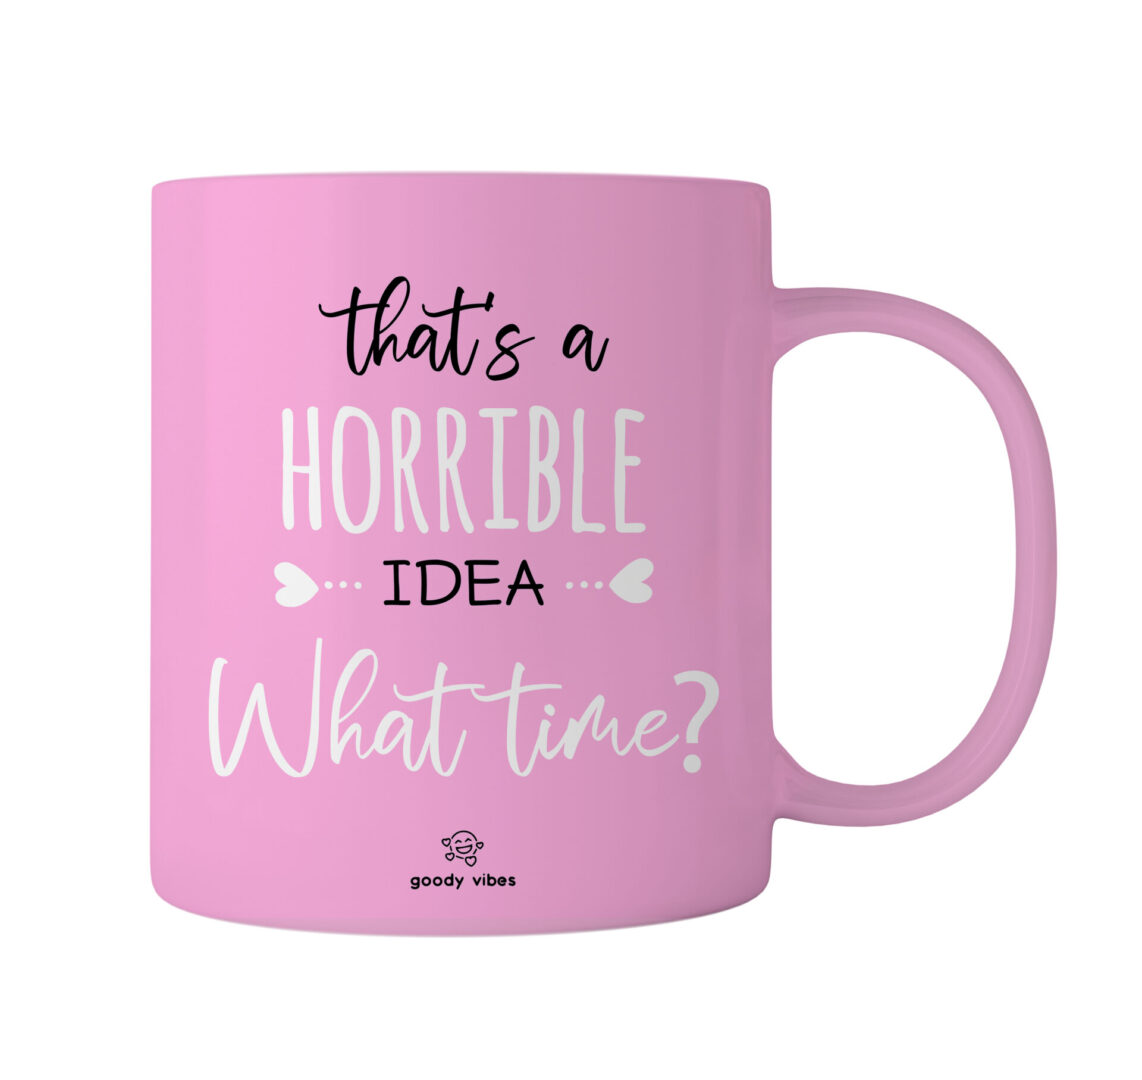 A pink mug with the words " that 's a horrible idea what time ?" written on it.